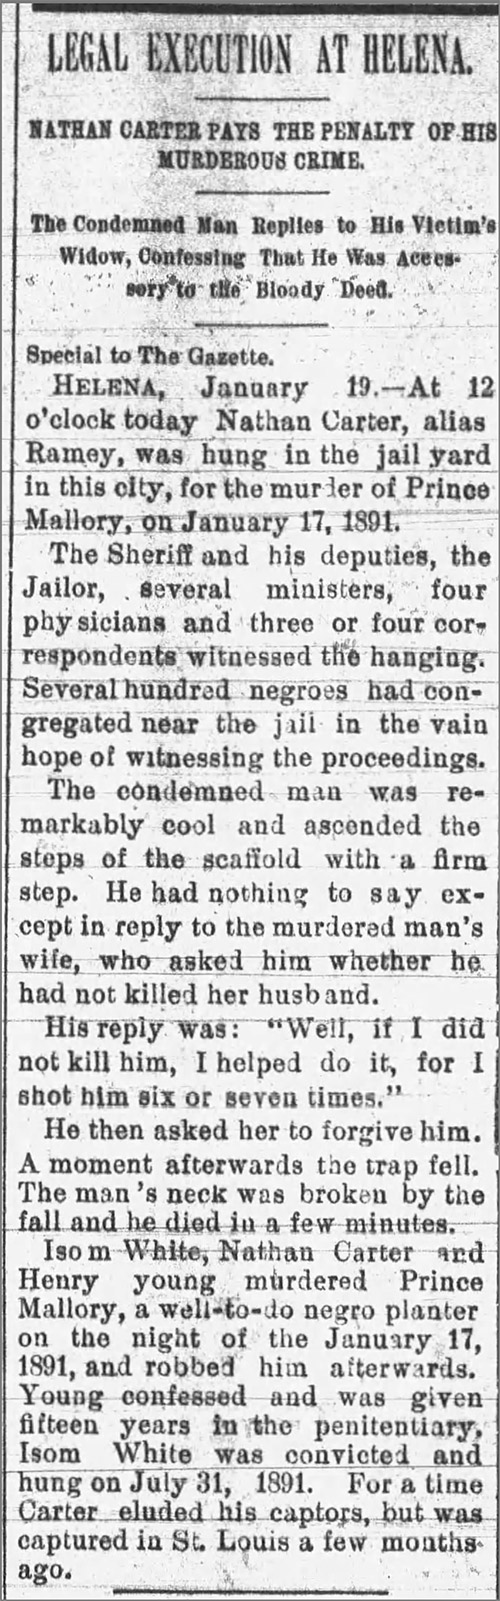 "Legal Execution at Helena" newspaper clipping